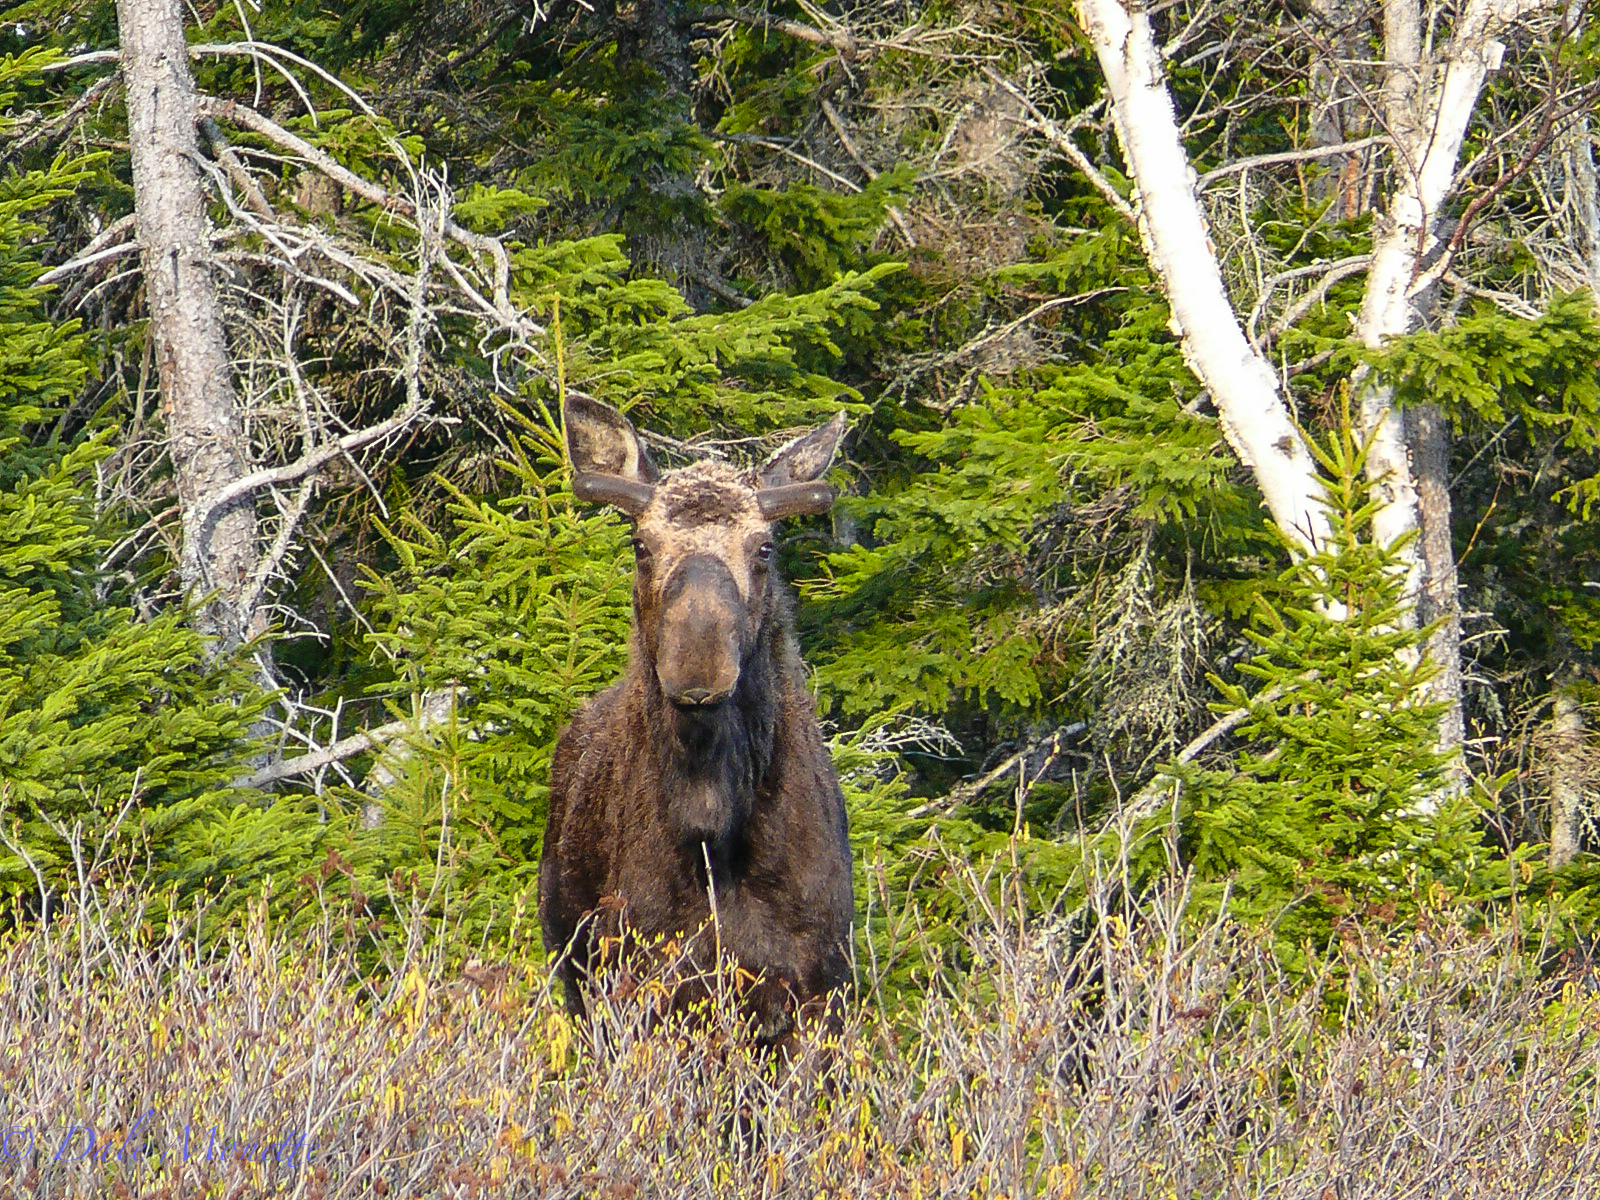   All these moose photos you will see were taken in The Cape Breton Highlands National Park on Cape Breton Island, Nova Scotia, Canada Enjoy them as I had a blast photographing them.  